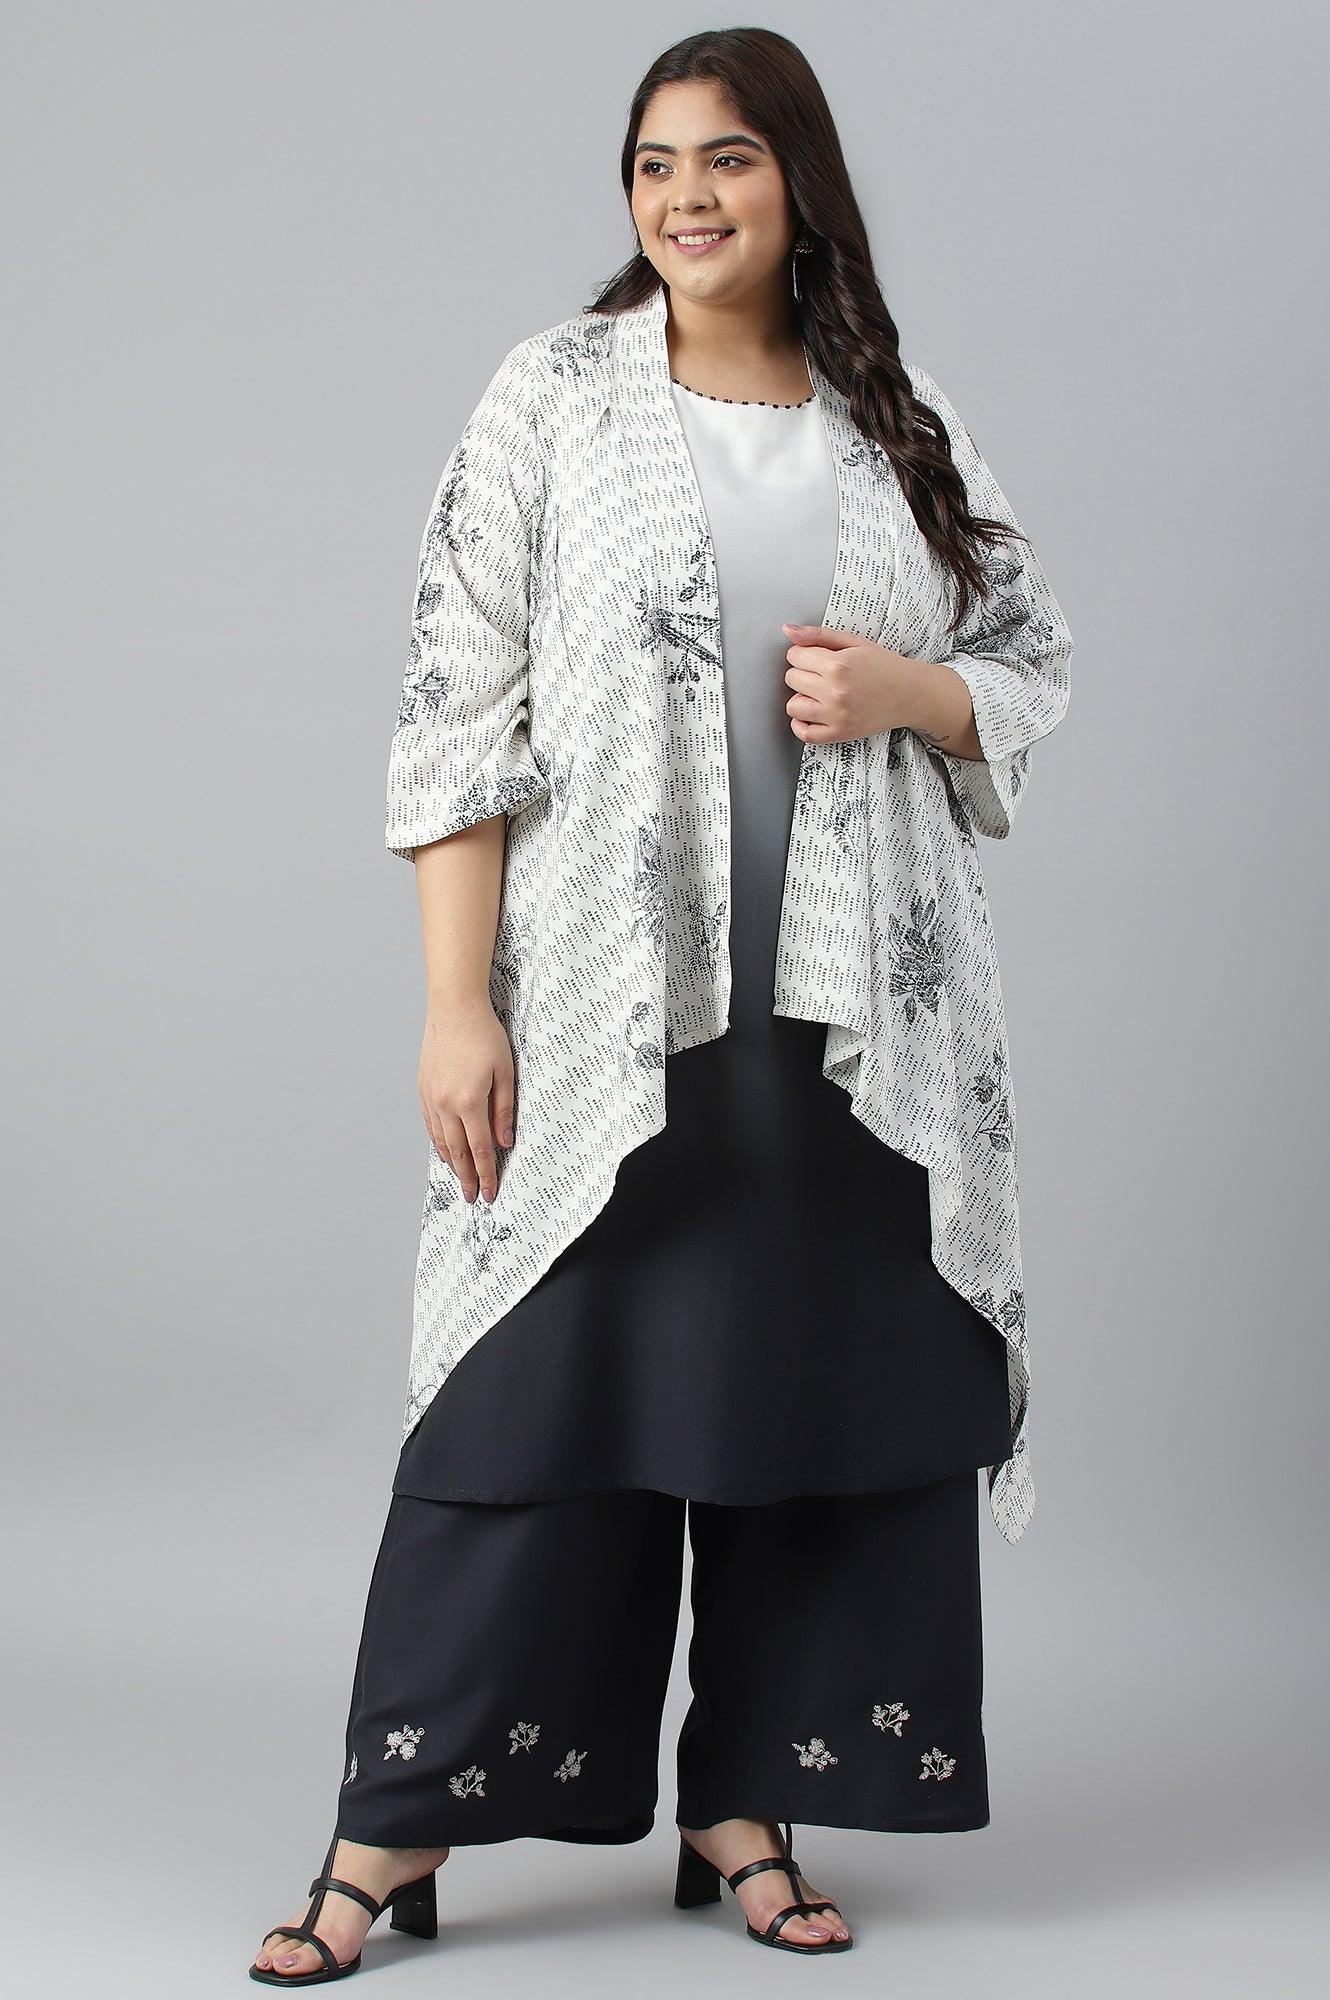 Plus Size White And Deep Blue Ombre kurta With Printed Gillet And Parallel Pants - wforwoman